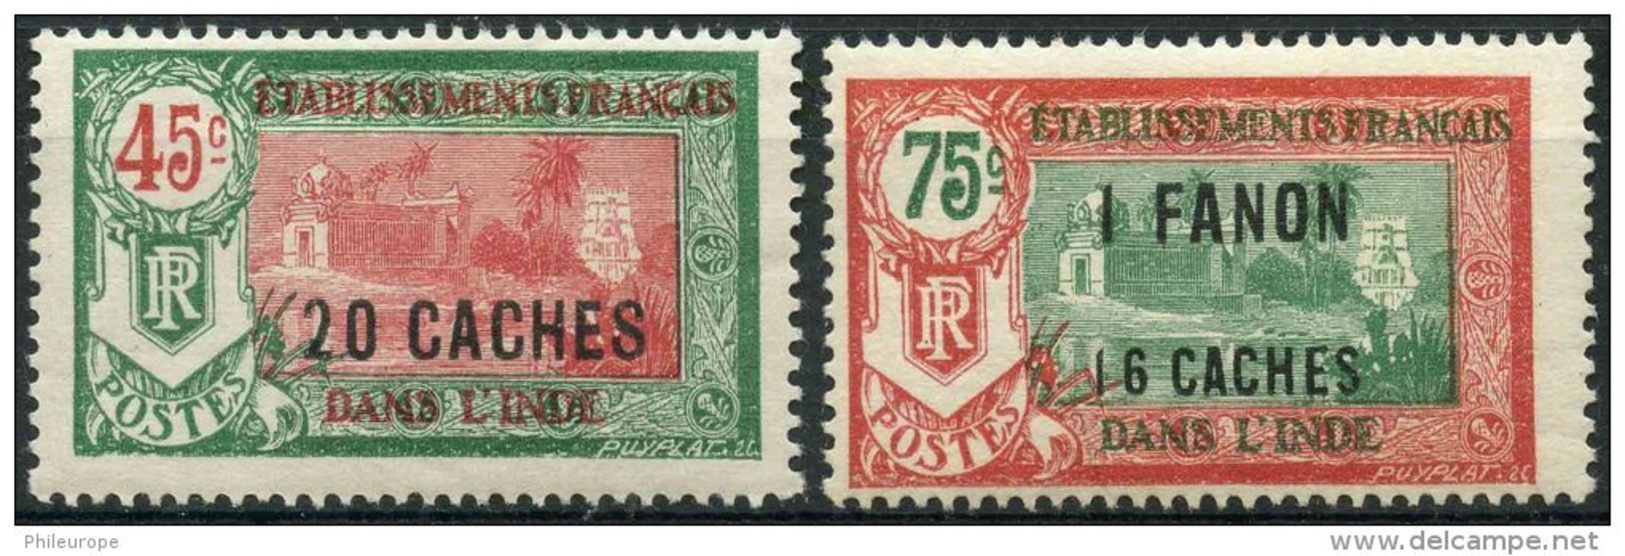 Inde (1927) N 79 à 80 * (charniere) - Unused Stamps